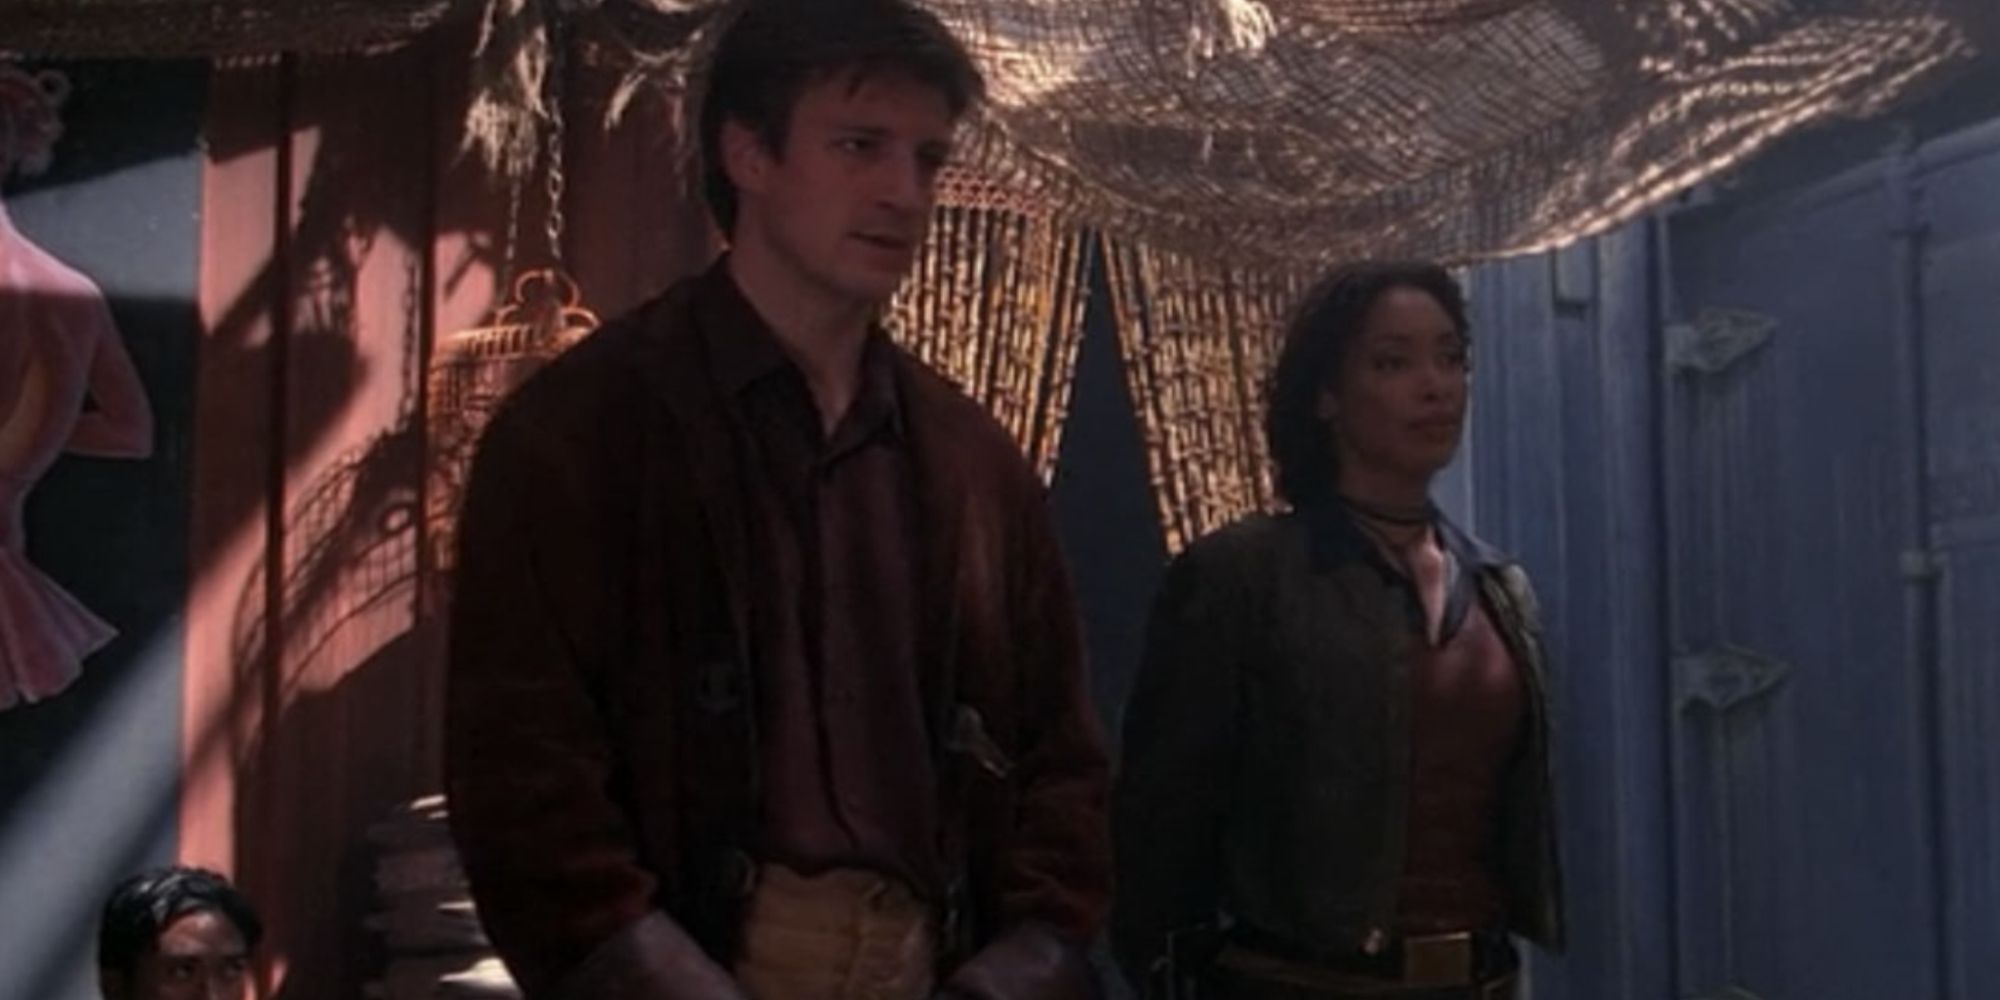 Nathan Fillion and Gina Torres as malcolm reynolds and zoe washburne speaking to someone